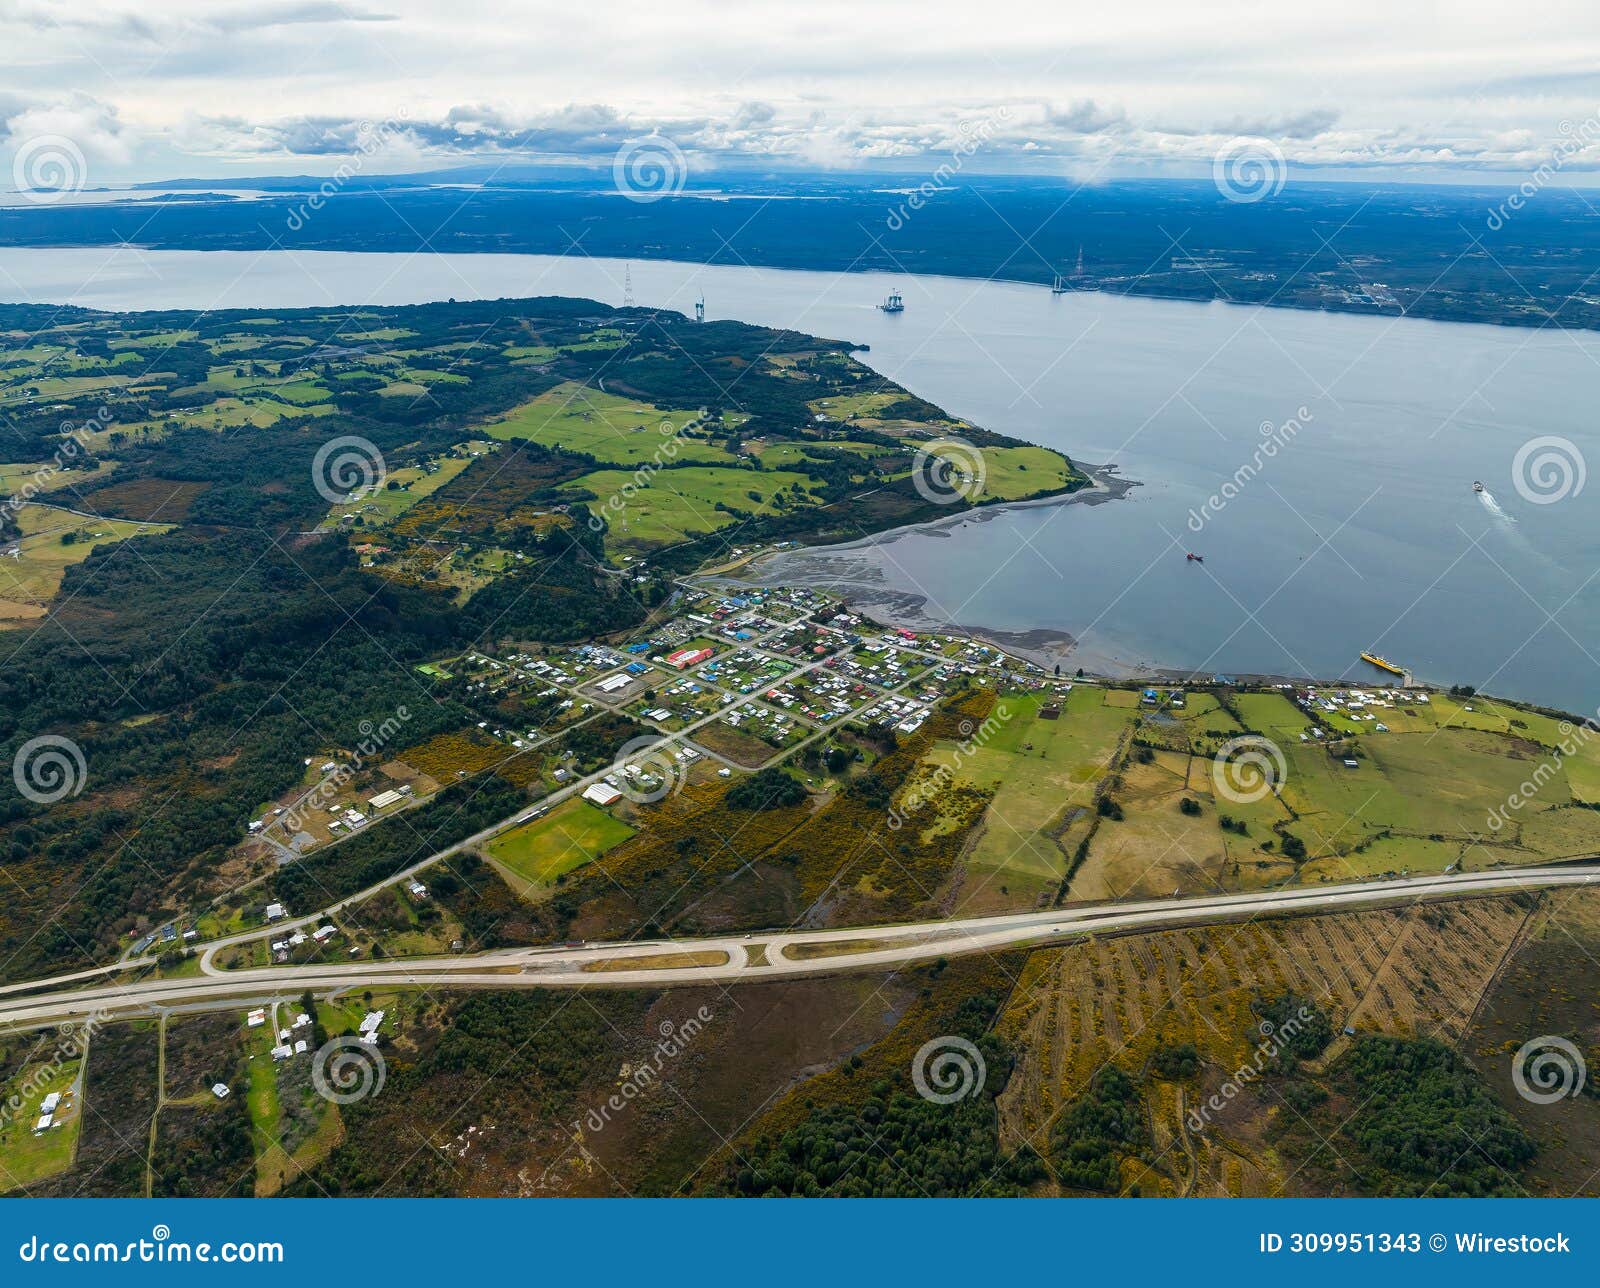 aerial view of chacao channel on chiloe island, chile